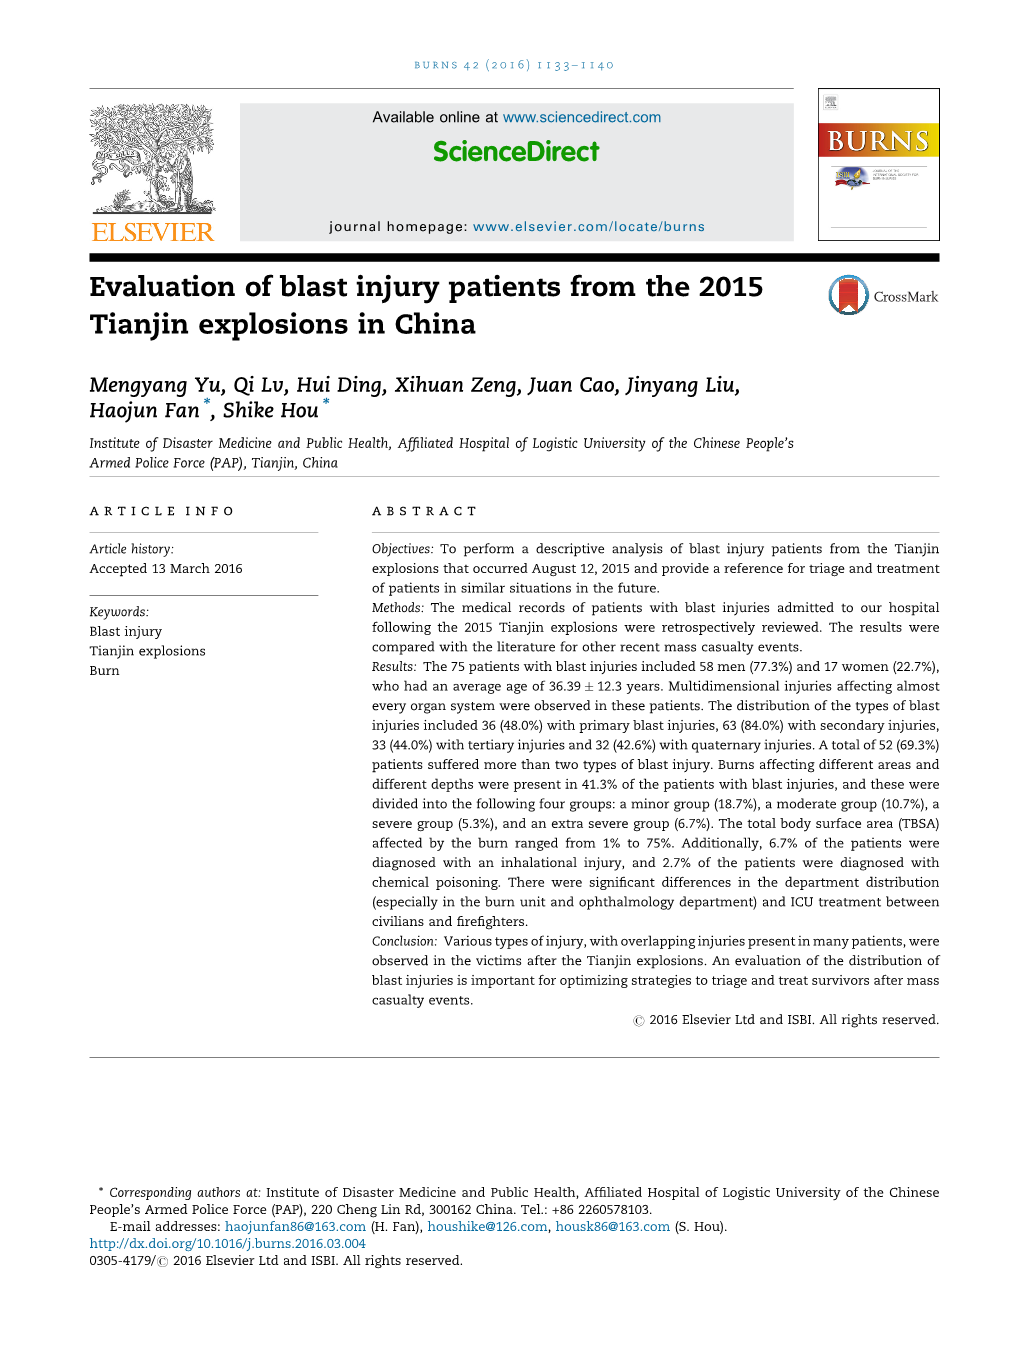 Evaluation of Blast Injury Patients from the 2015 Tianjin Explosions in China